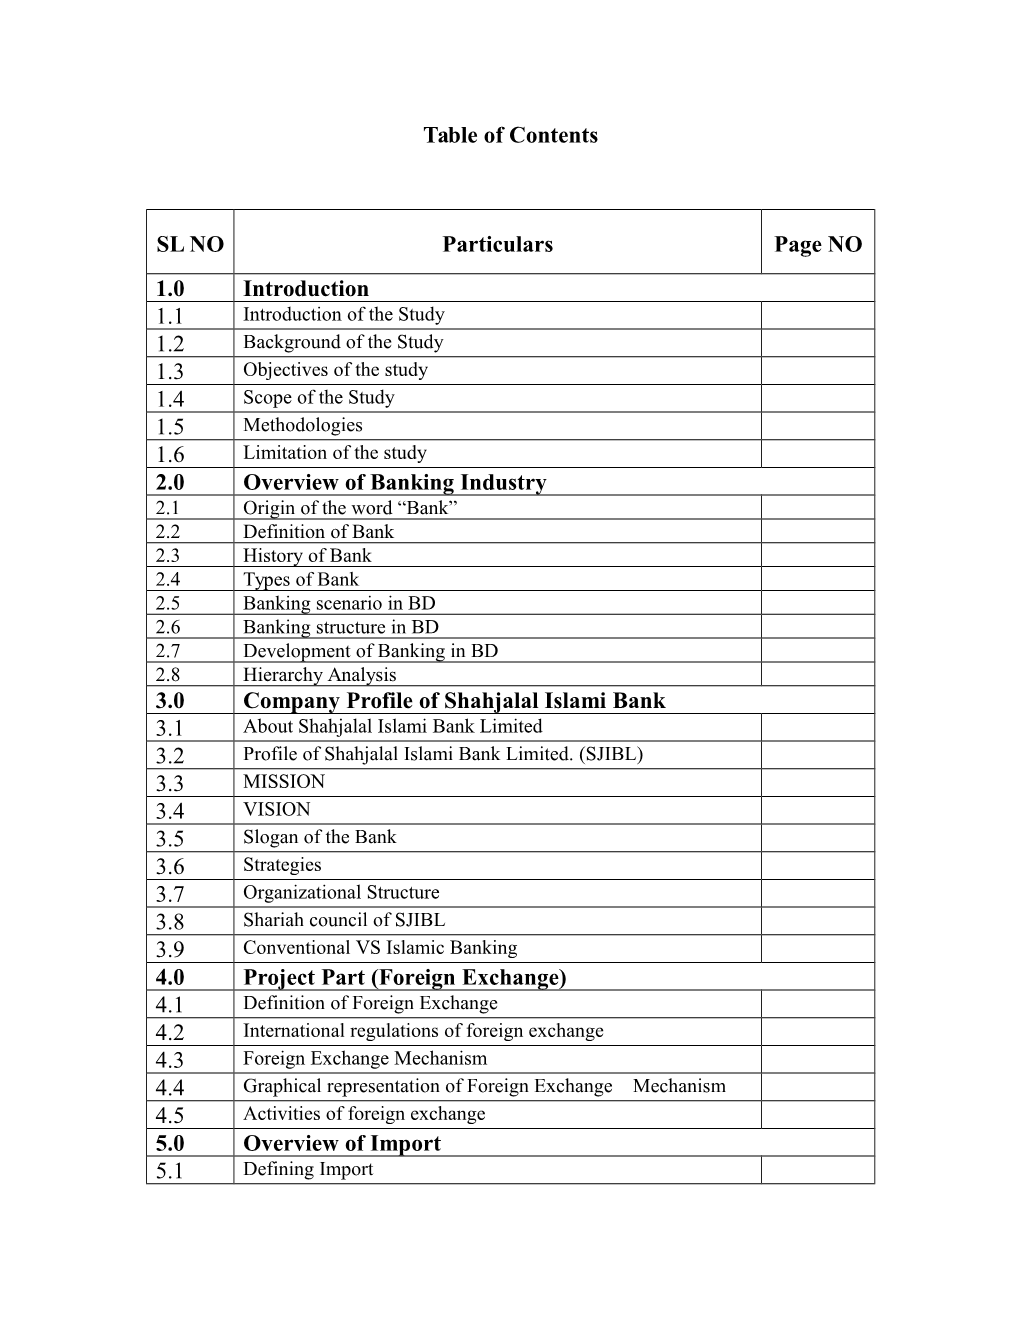 Table of Contents SL NO Particulars Page NO 1.0 Introduction 1.1 1.2 1.3 1.4 1.5 1.6 2.0 Overview of Banking Industry 3.0 Compan